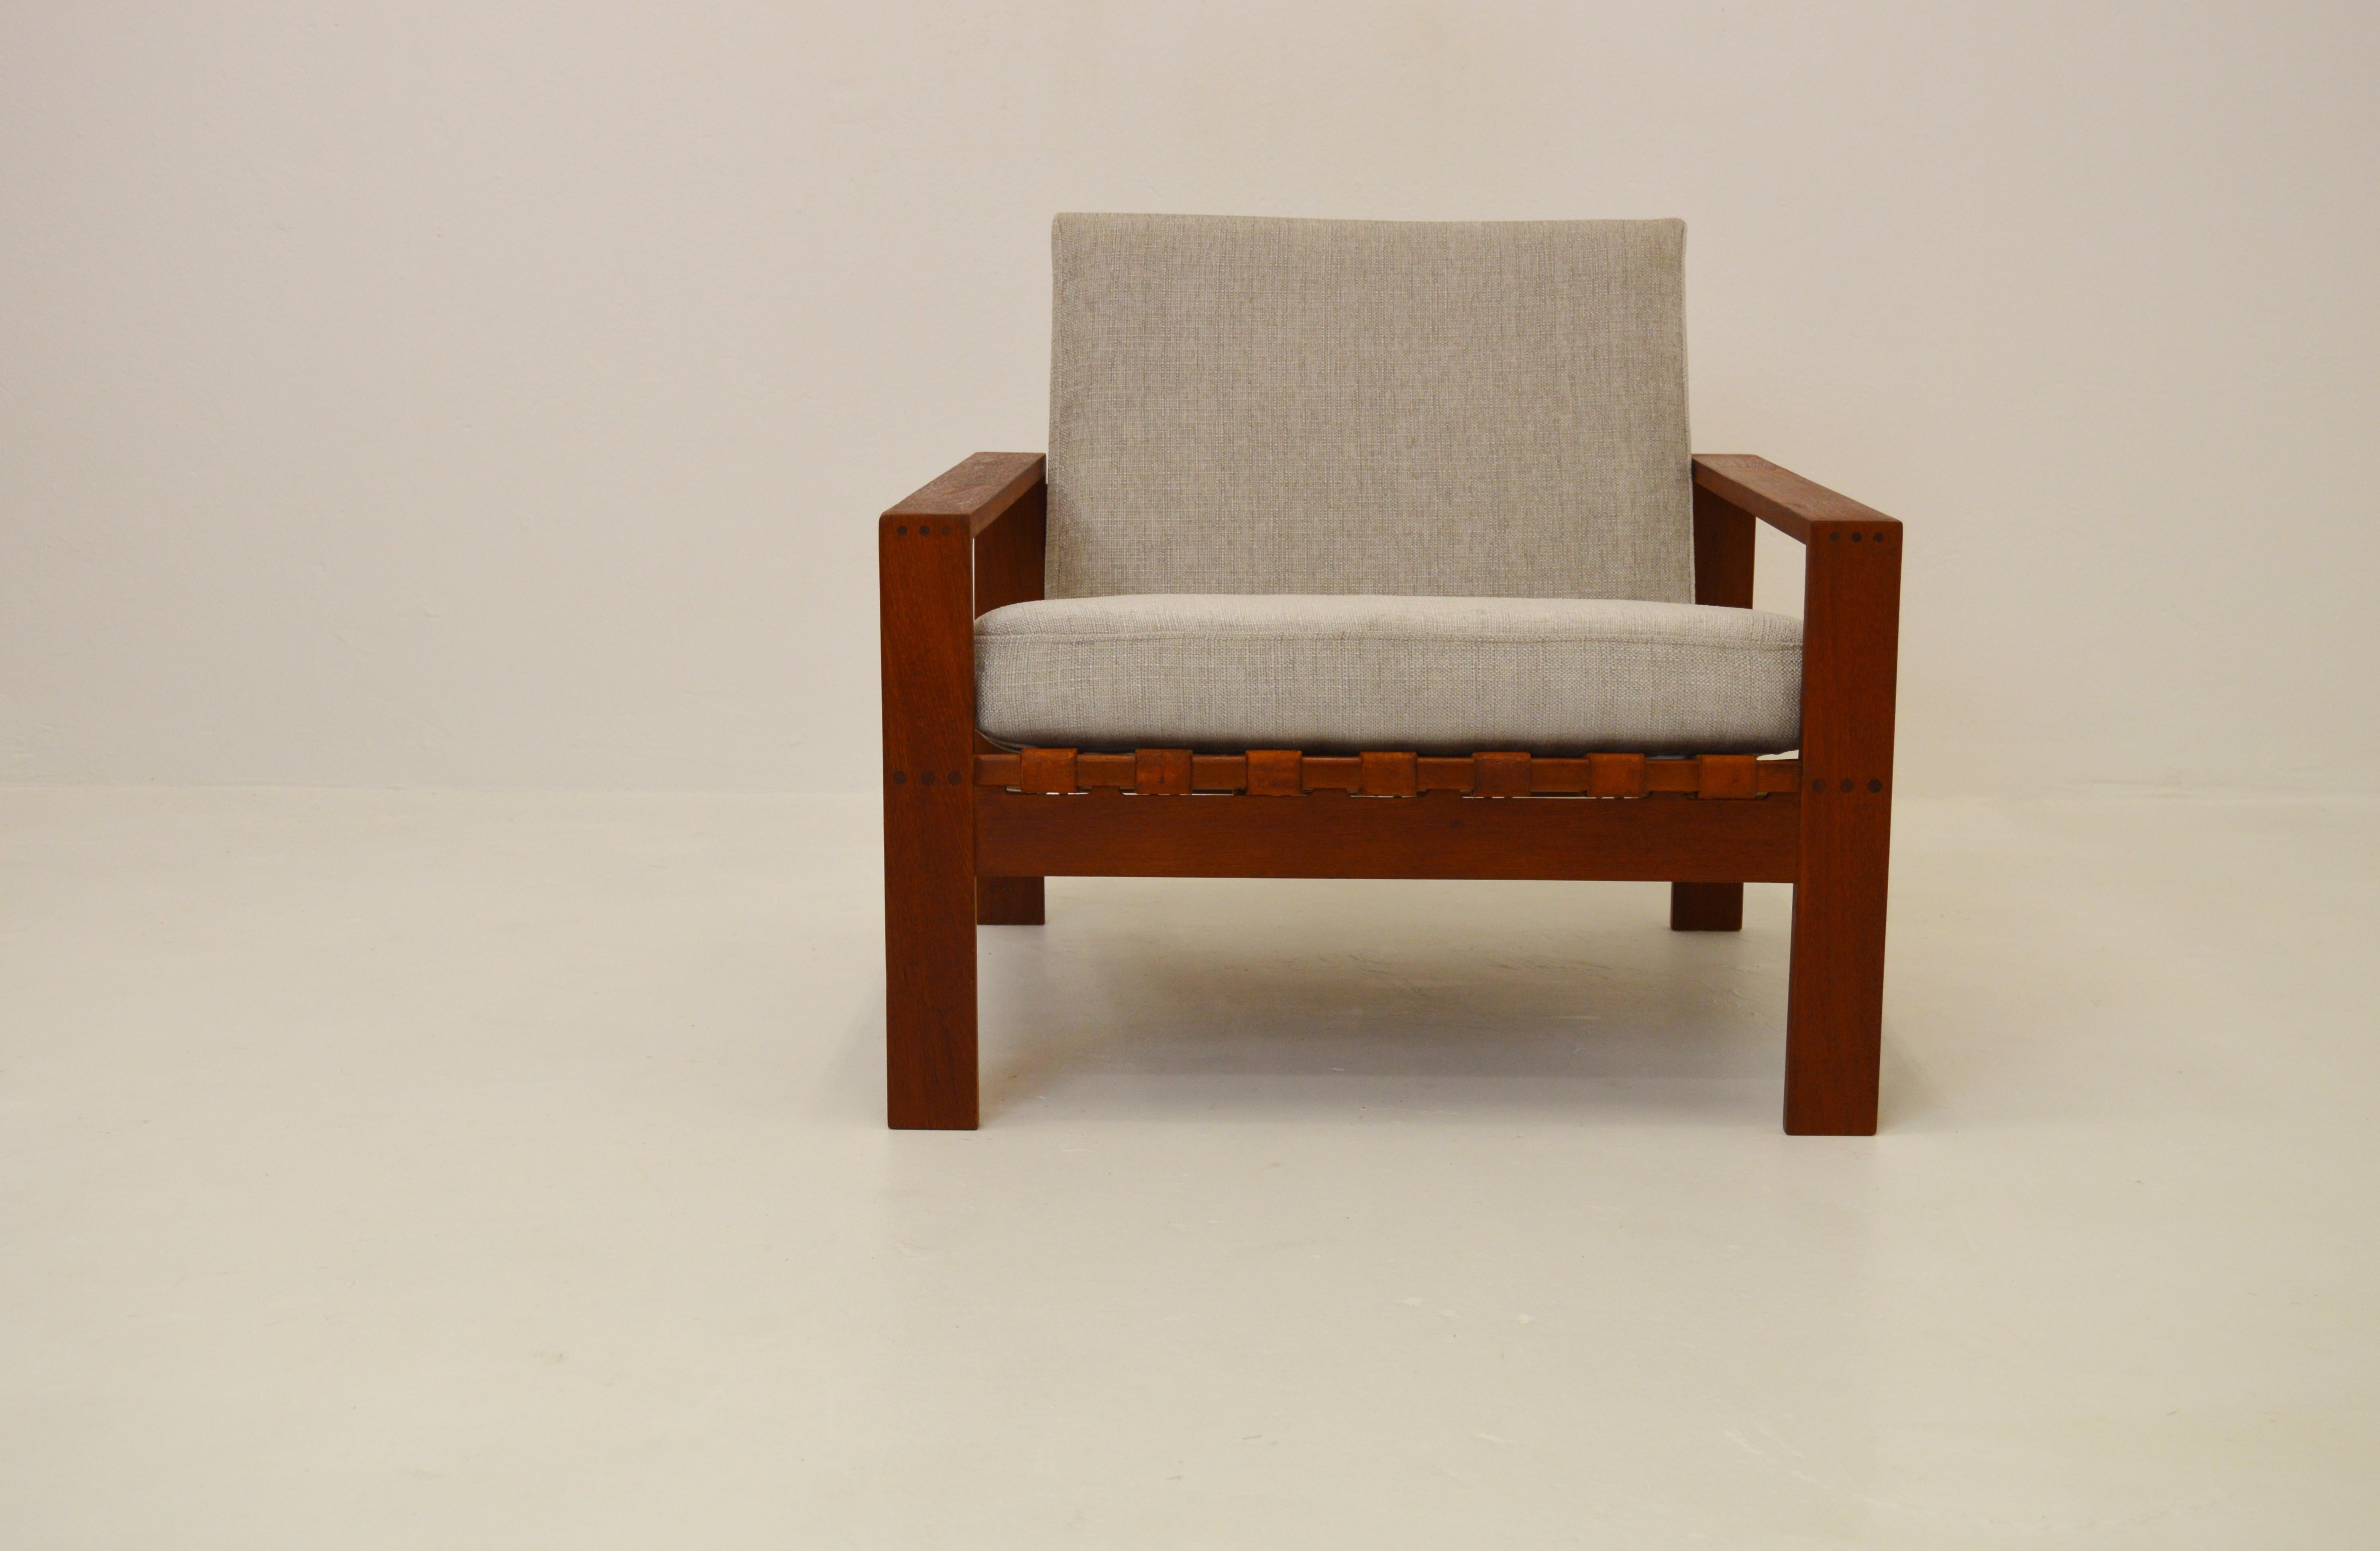 Midcentury Svante Skogh Easy Chair with Leather Webbing In Good Condition For Sale In Alvesta, SE